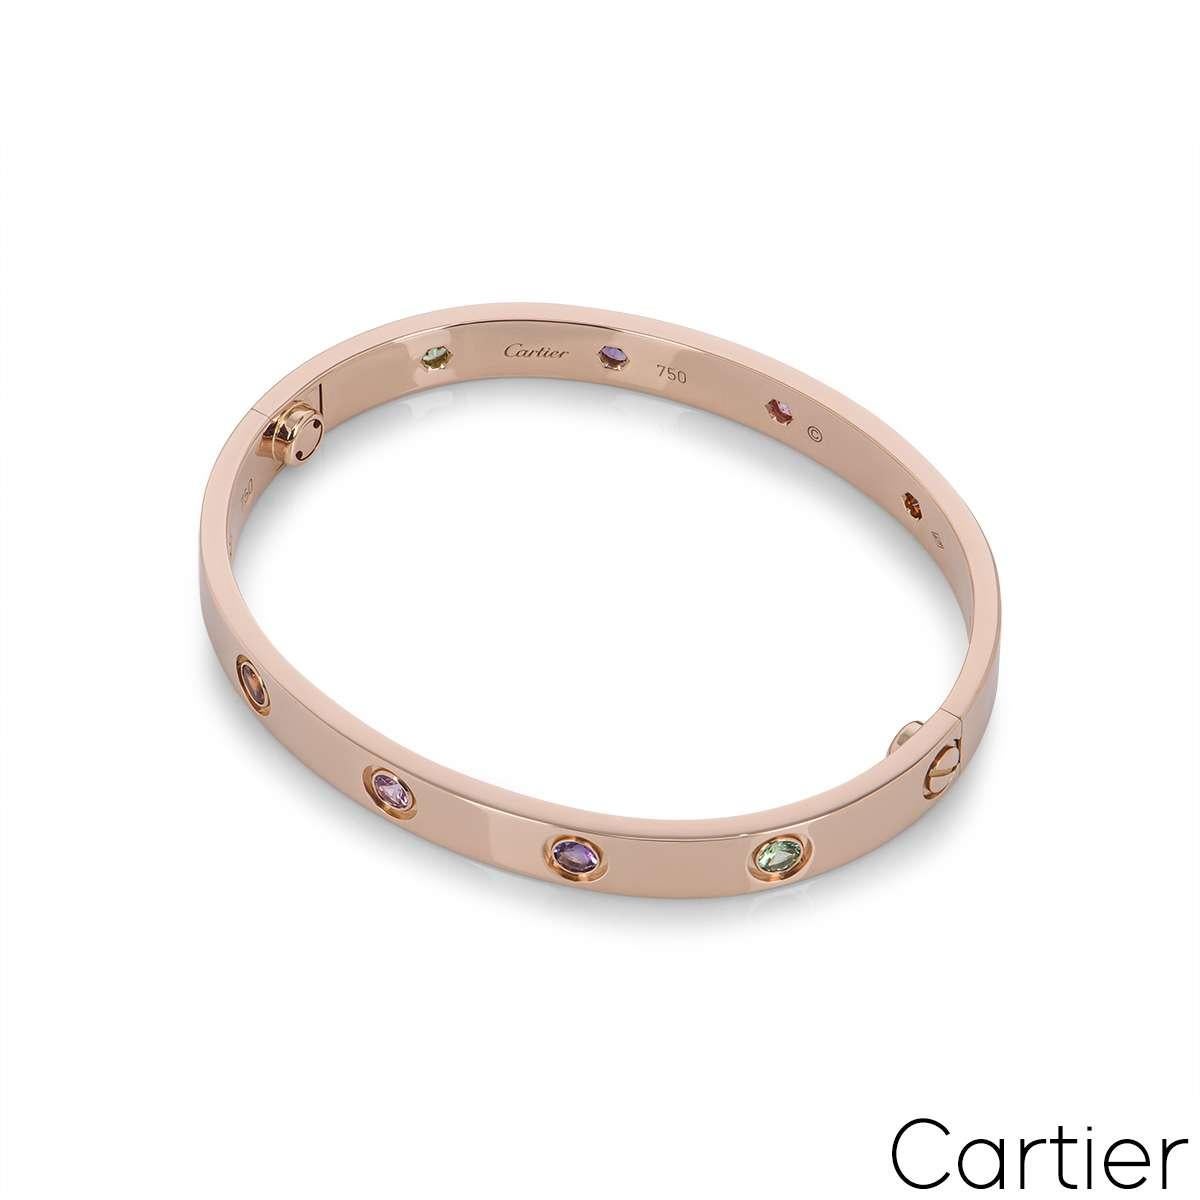 Cartier Rose Gold Coloured Stones Love Bracelet Size 19 B6036519 In Excellent Condition For Sale In London, GB